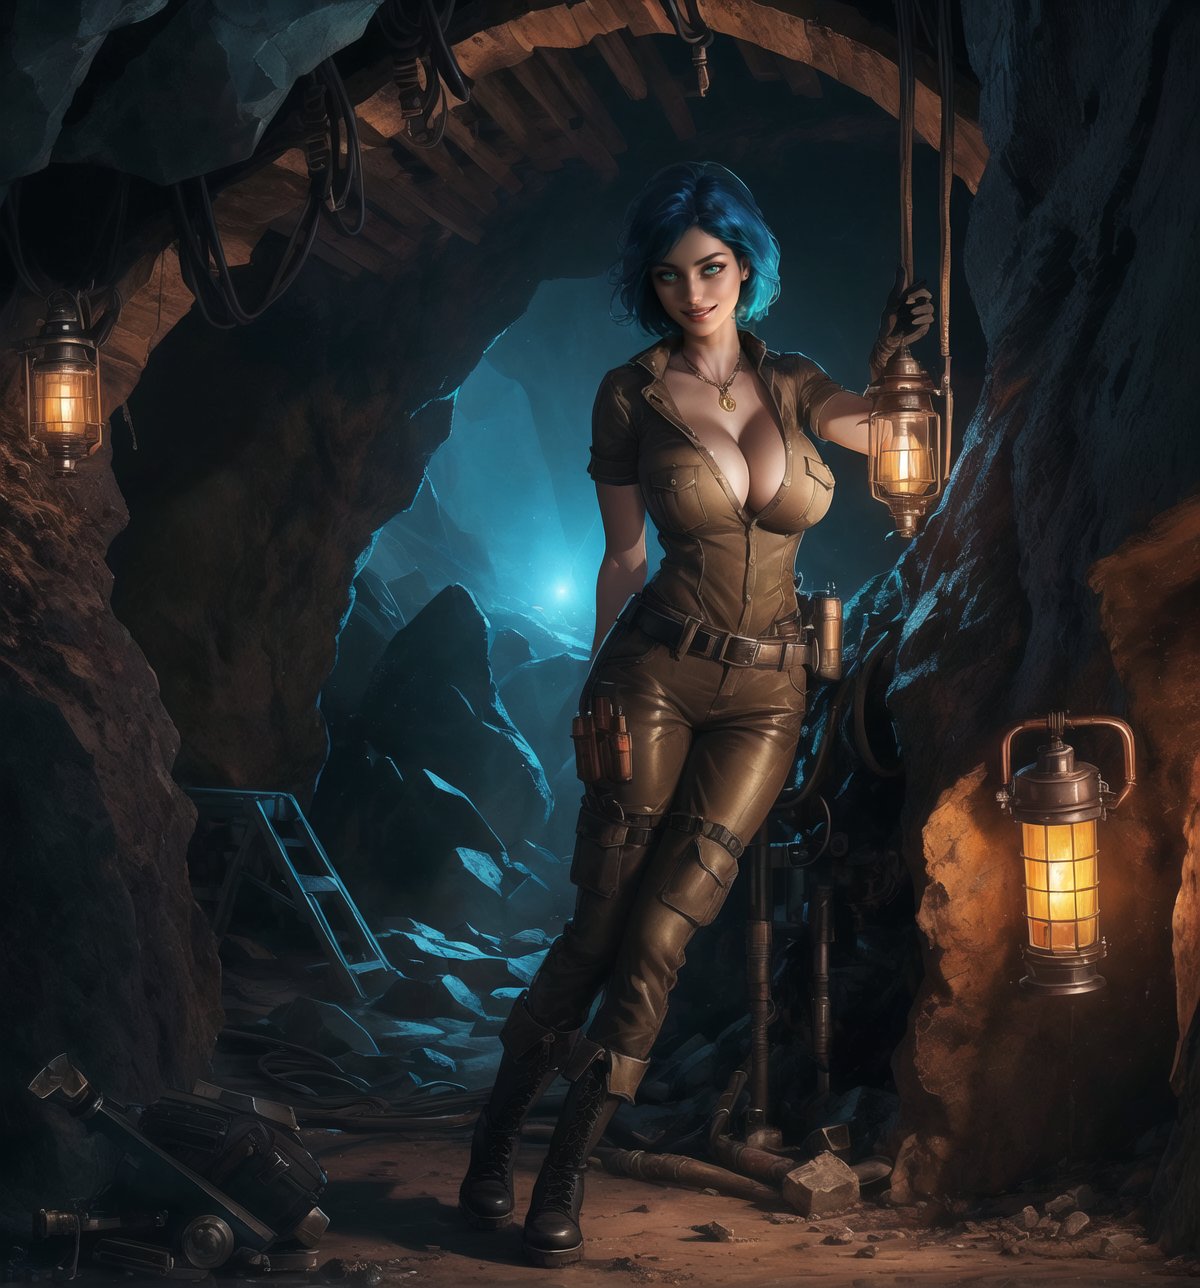 A masterpiece in 4K ultra-detailed realistic and futuristic style. | Ayla, a 26-year-old woman with short, messy blue hair, wears a brown mining suit with copper and black accents. The suit consists of a short-sleeved shirt, long pants, and high-top boots. She also wears a protective helmet with a lamp on the front, brown leather gloves, a belt with various tools, and a copper pocket watch. Her green eyes are looking at the viewer, ((smiling)) showing her white teeth and lips painted in dark brown. The scene takes place in a mining cave, with rocky structures and wooden and metal frameworks, mining machinery and equipment, and lamps attached to the walls. | The image highlights Ayla's imposing figure amidst the mining cave. The rocky, wooden, and metal structures, along with Ayla, the mining equipment, the tools on her belt, and the lamps on the walls, create a futuristic and industrial atmosphere. The lamps and the light from the helmet's lamp create dramatic shadows and highlight the details of the scene. | Soft and dark lighting effects create a relaxing and mysterious atmosphere, while rough and detailed textures on the structures and the suit add realism to the image. | A relaxing and terrifying scene of Ayla, a woman miner, in a futuristic mining cave. | (((((The image reveals a full-body_shot as she assumes a sensual_pose, engagingly leaning against a structure within the scene in an exciting manner. She takes on a sensual_pose as she interacts, boldly leaning on a structure, leaning back in an exciting way)))))). | ((perfect_body)), ((perfect_pose)), ((full-body_shot)), ((perfect_fingers, better_hands, perfect_hands)), ((perfect_legs, perfect_feet)), ((huge_breasts, big_natural_breasts, sagging_breasts)), ((perfect_design)), ((perfect_composition)), ((very detailed scene, very detailed background, perfect_layout, correct_imperfections)), ((More Detail, Enhance))